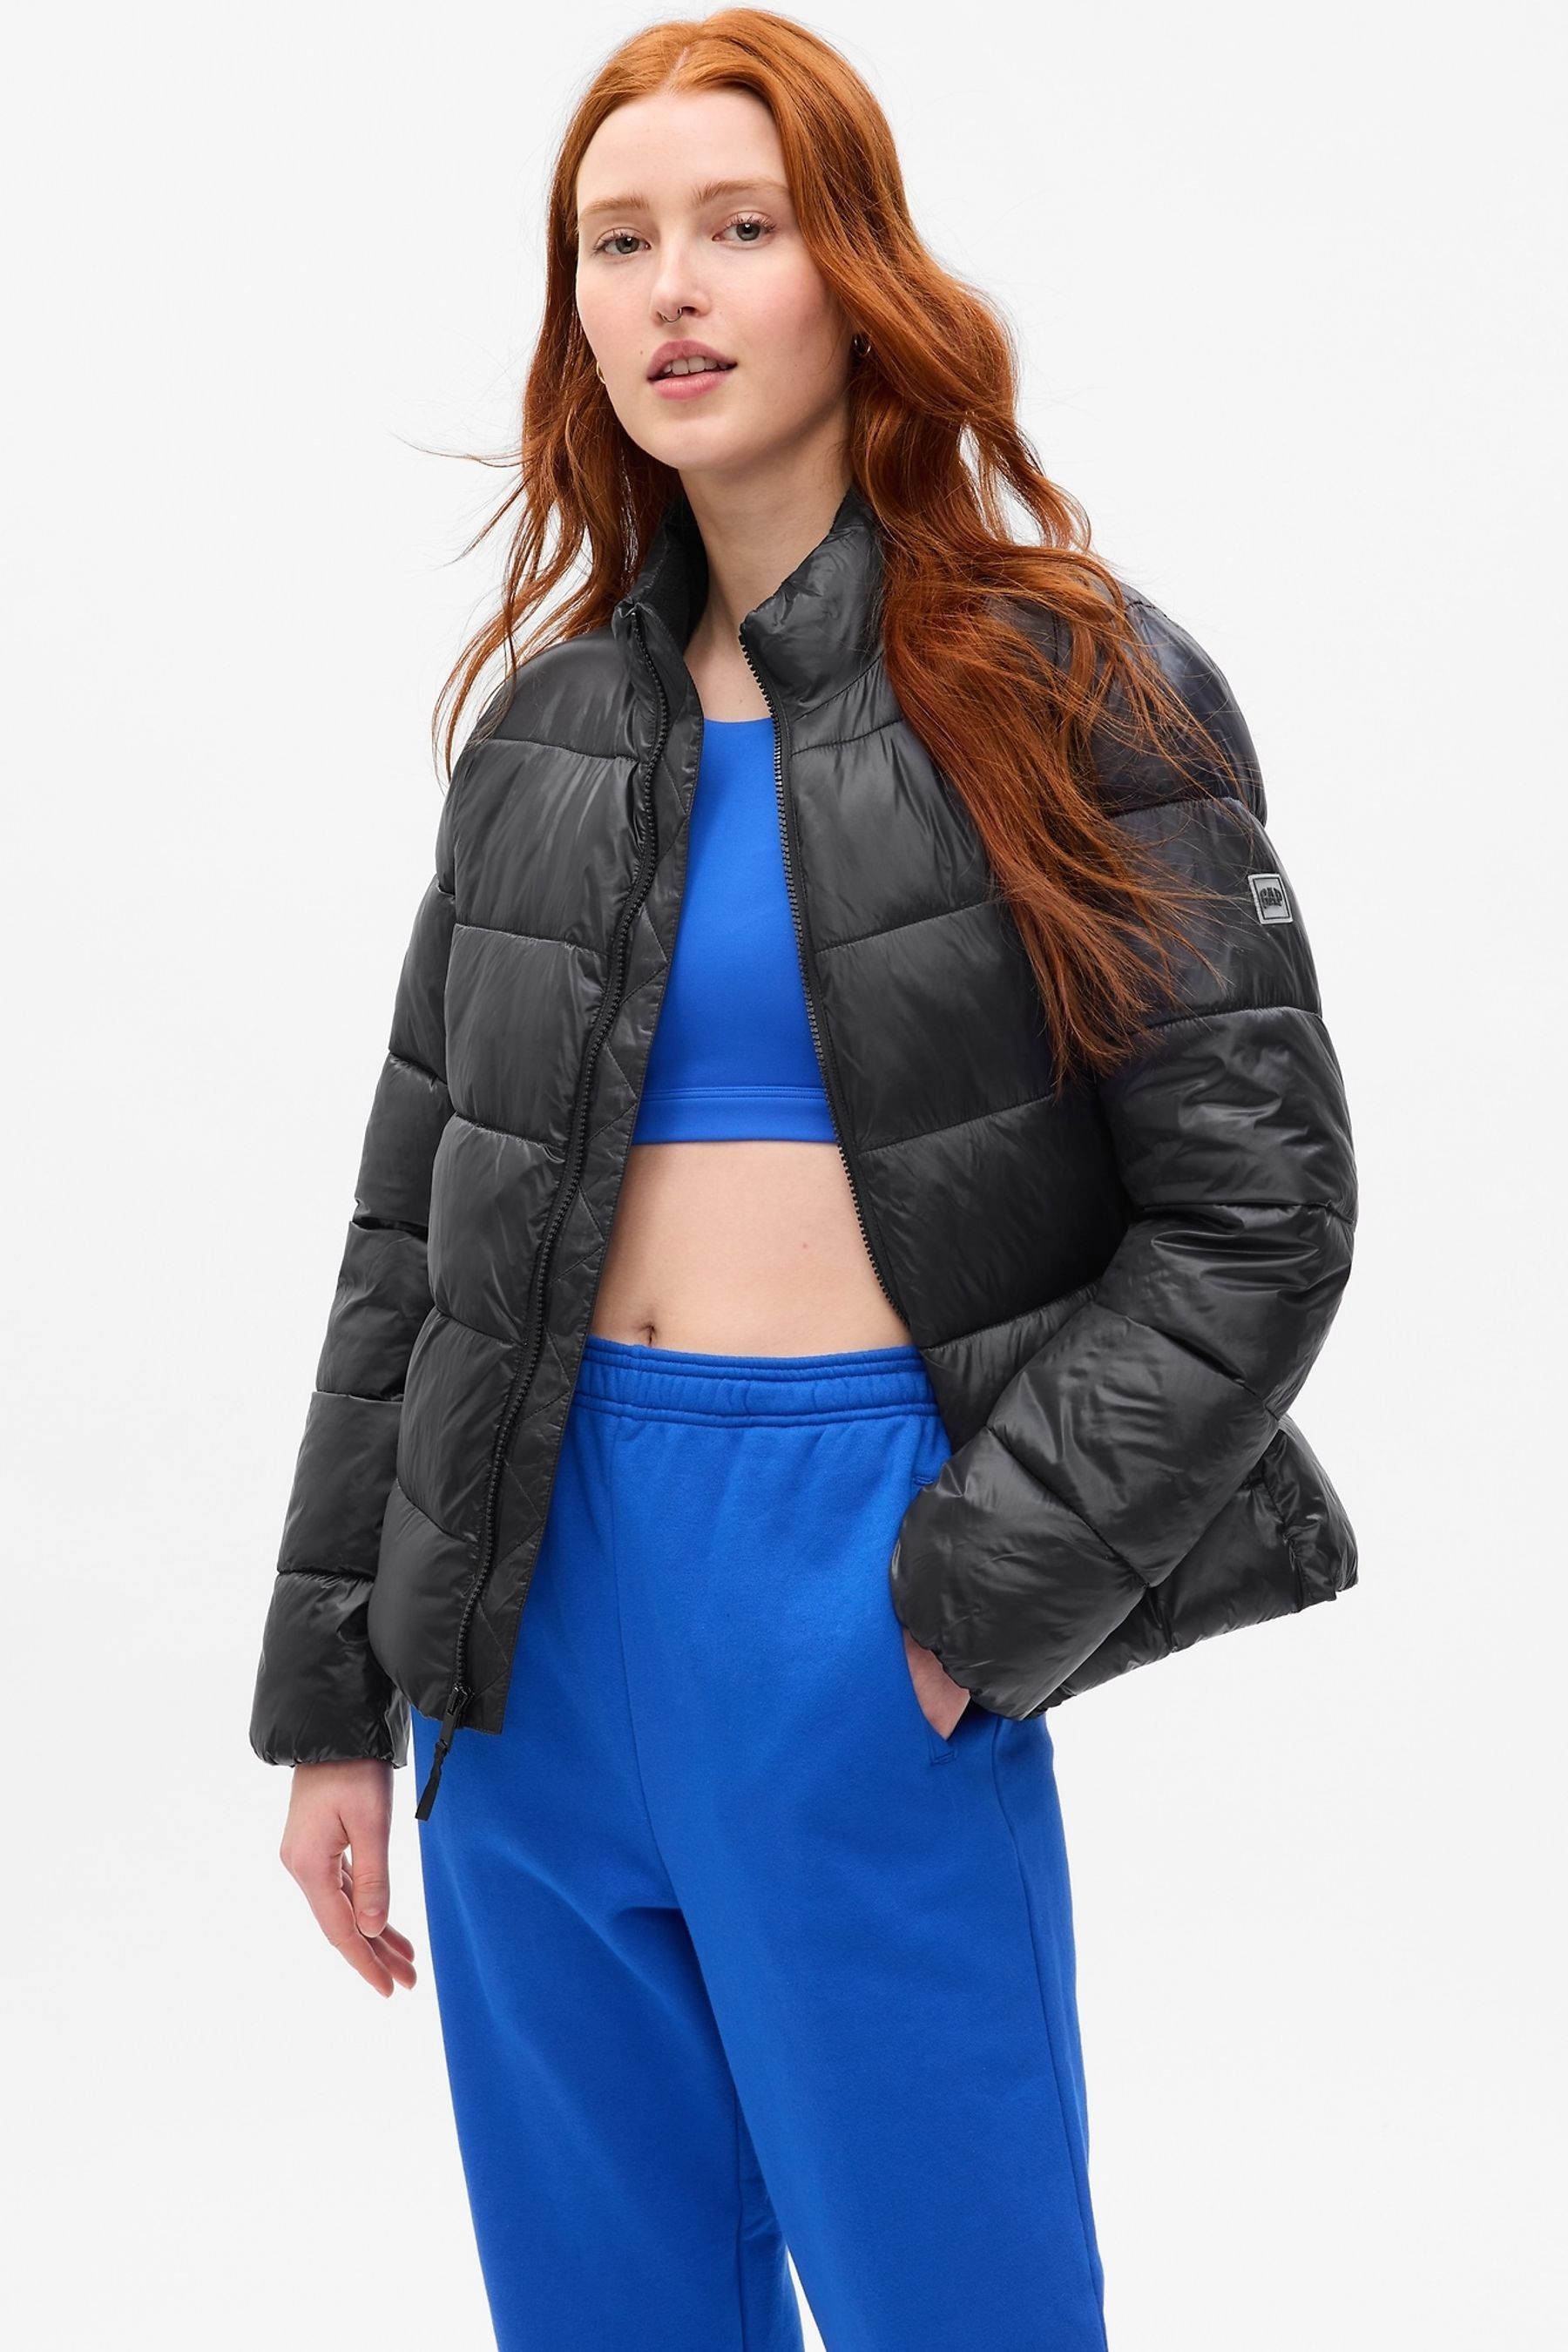 Buy Gap Black ColdControl Puffer Jacket from the Next UK online shop